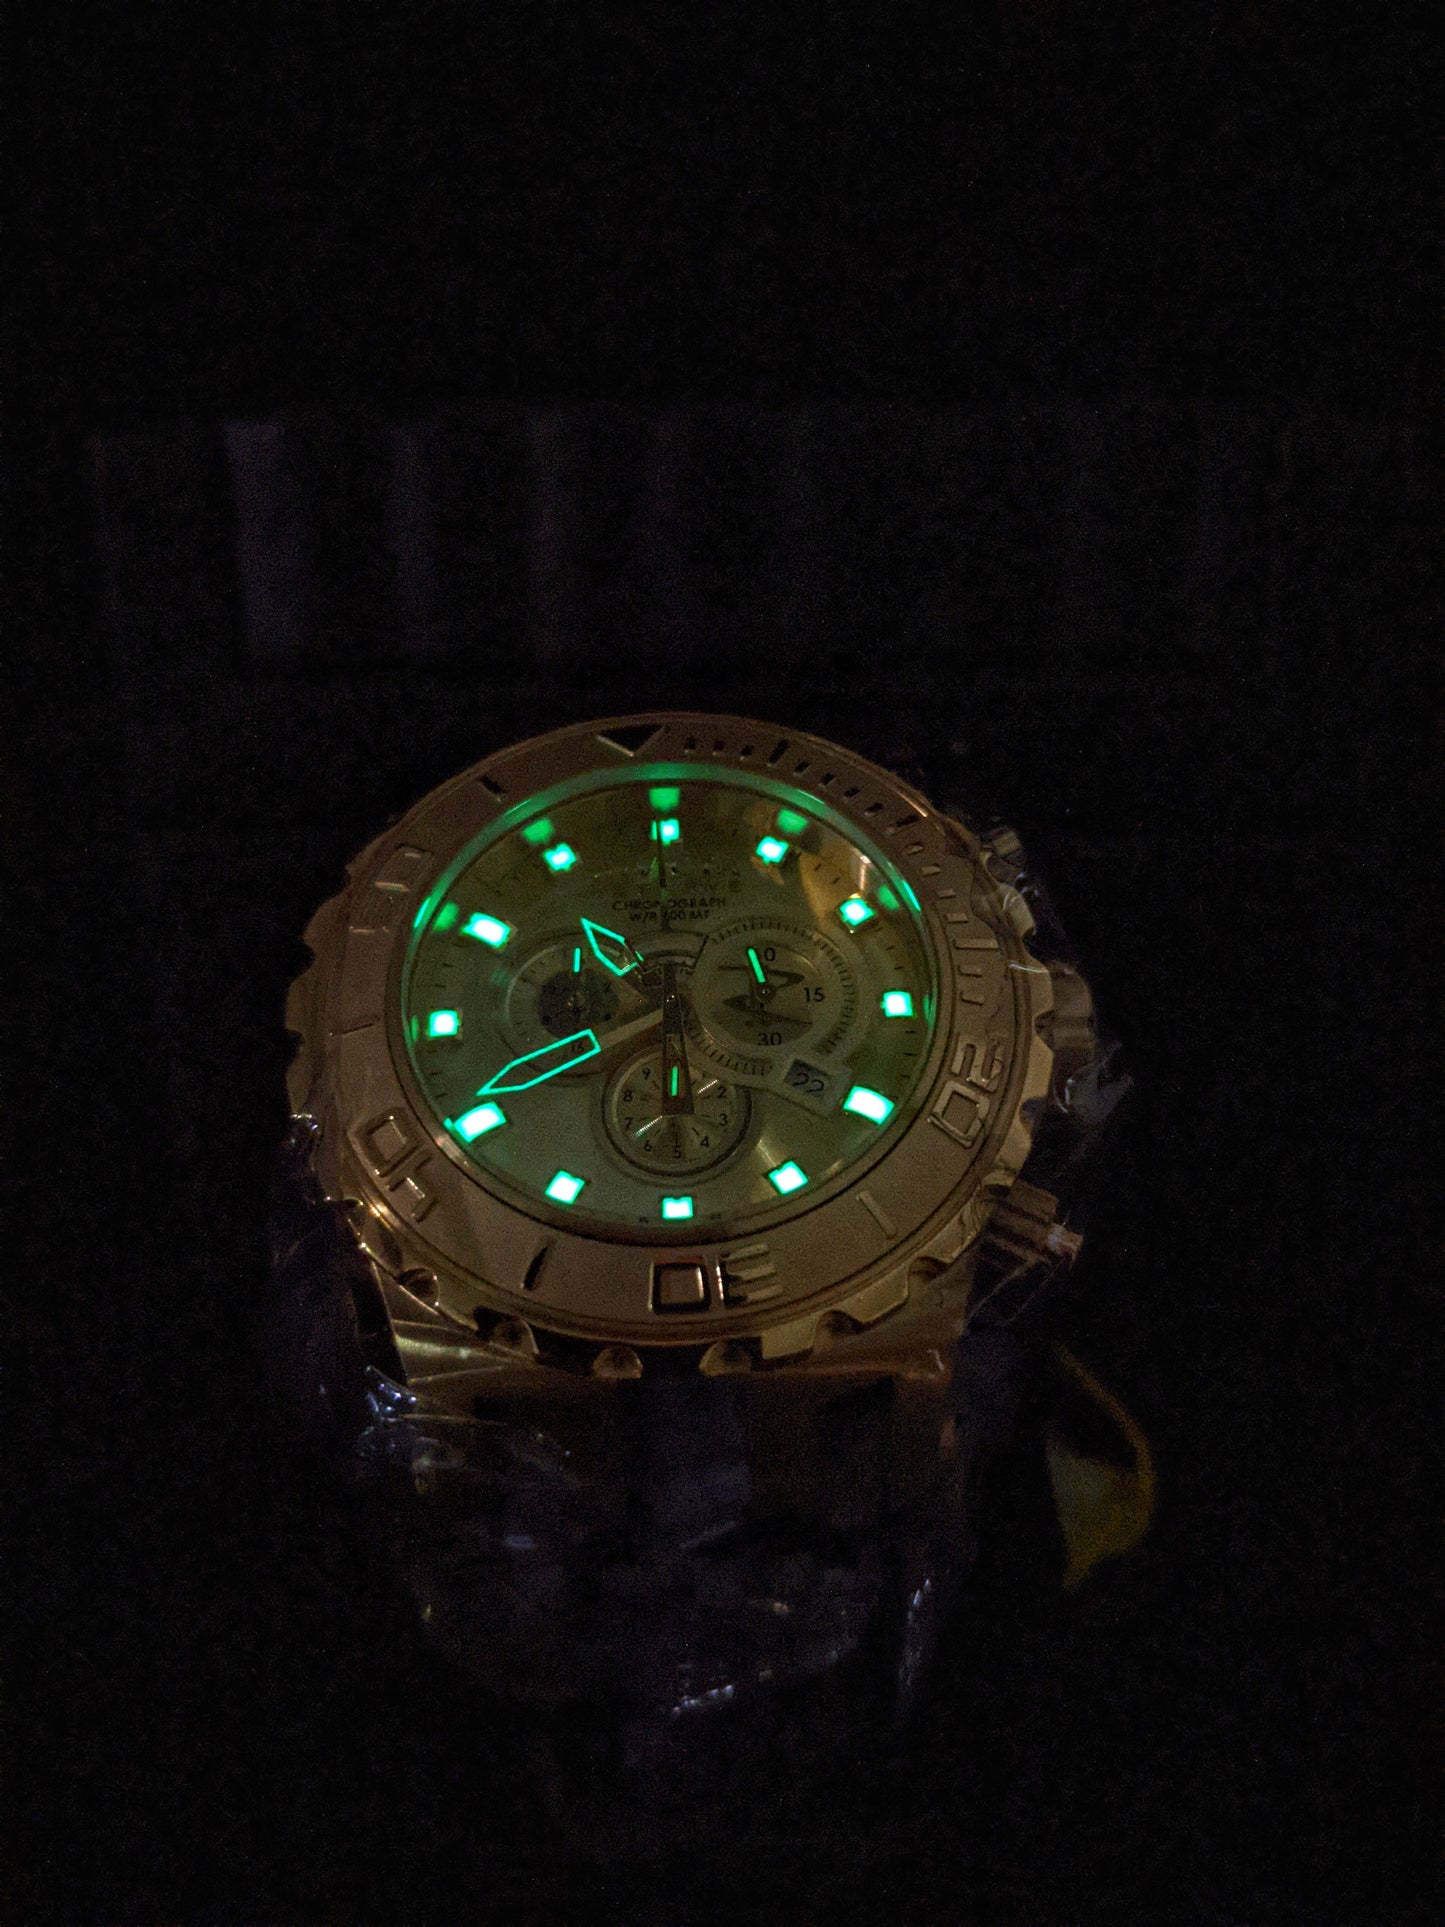 Invicta 6905 new with broken band